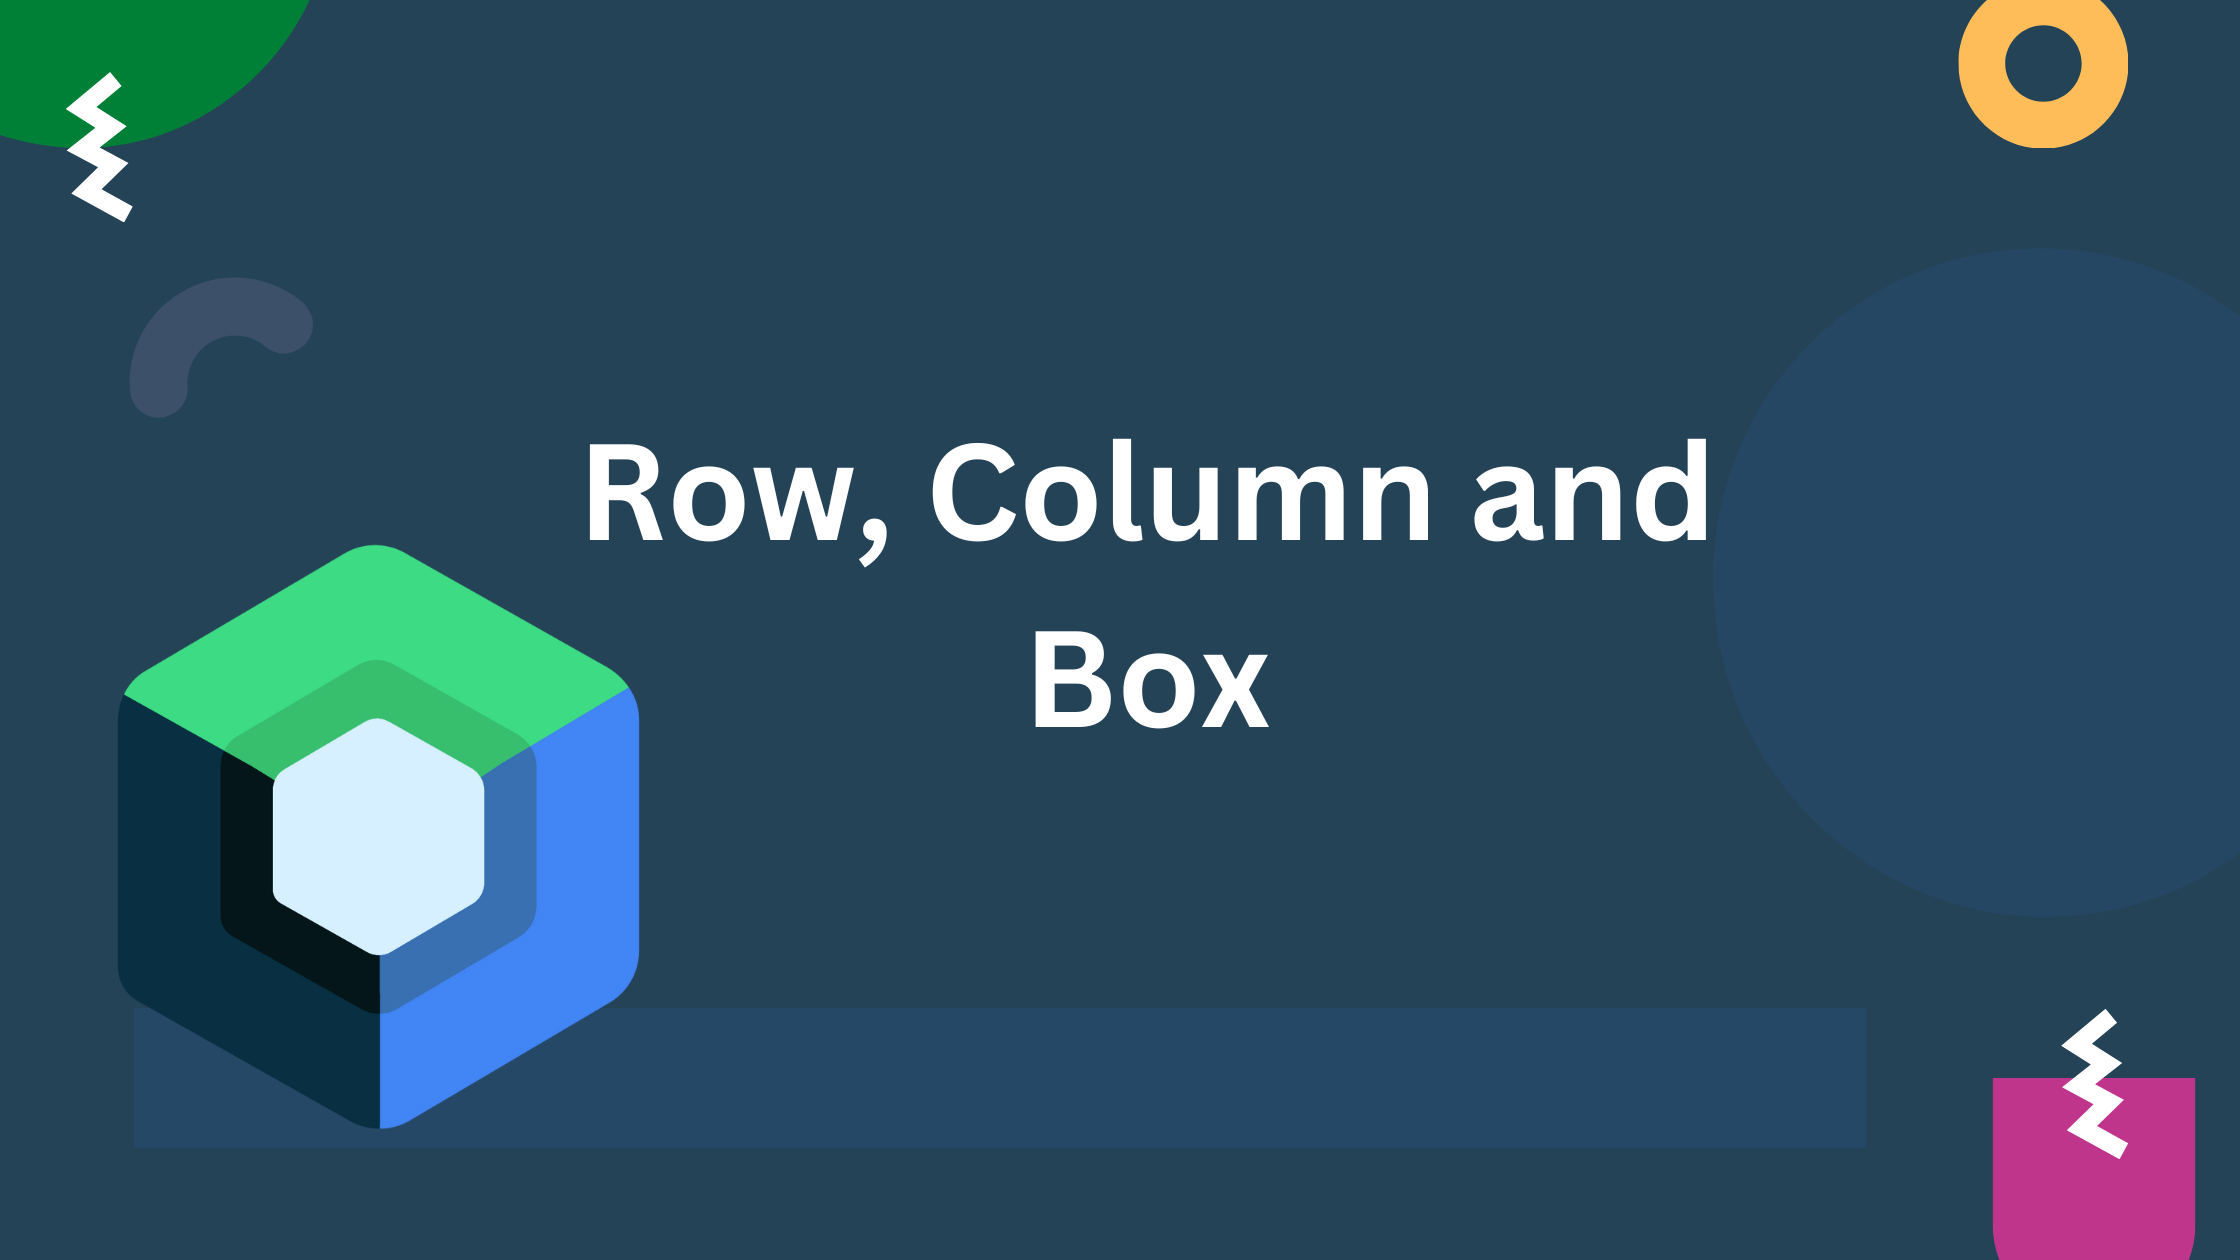 You are currently viewing Row, Column and Box in Compose